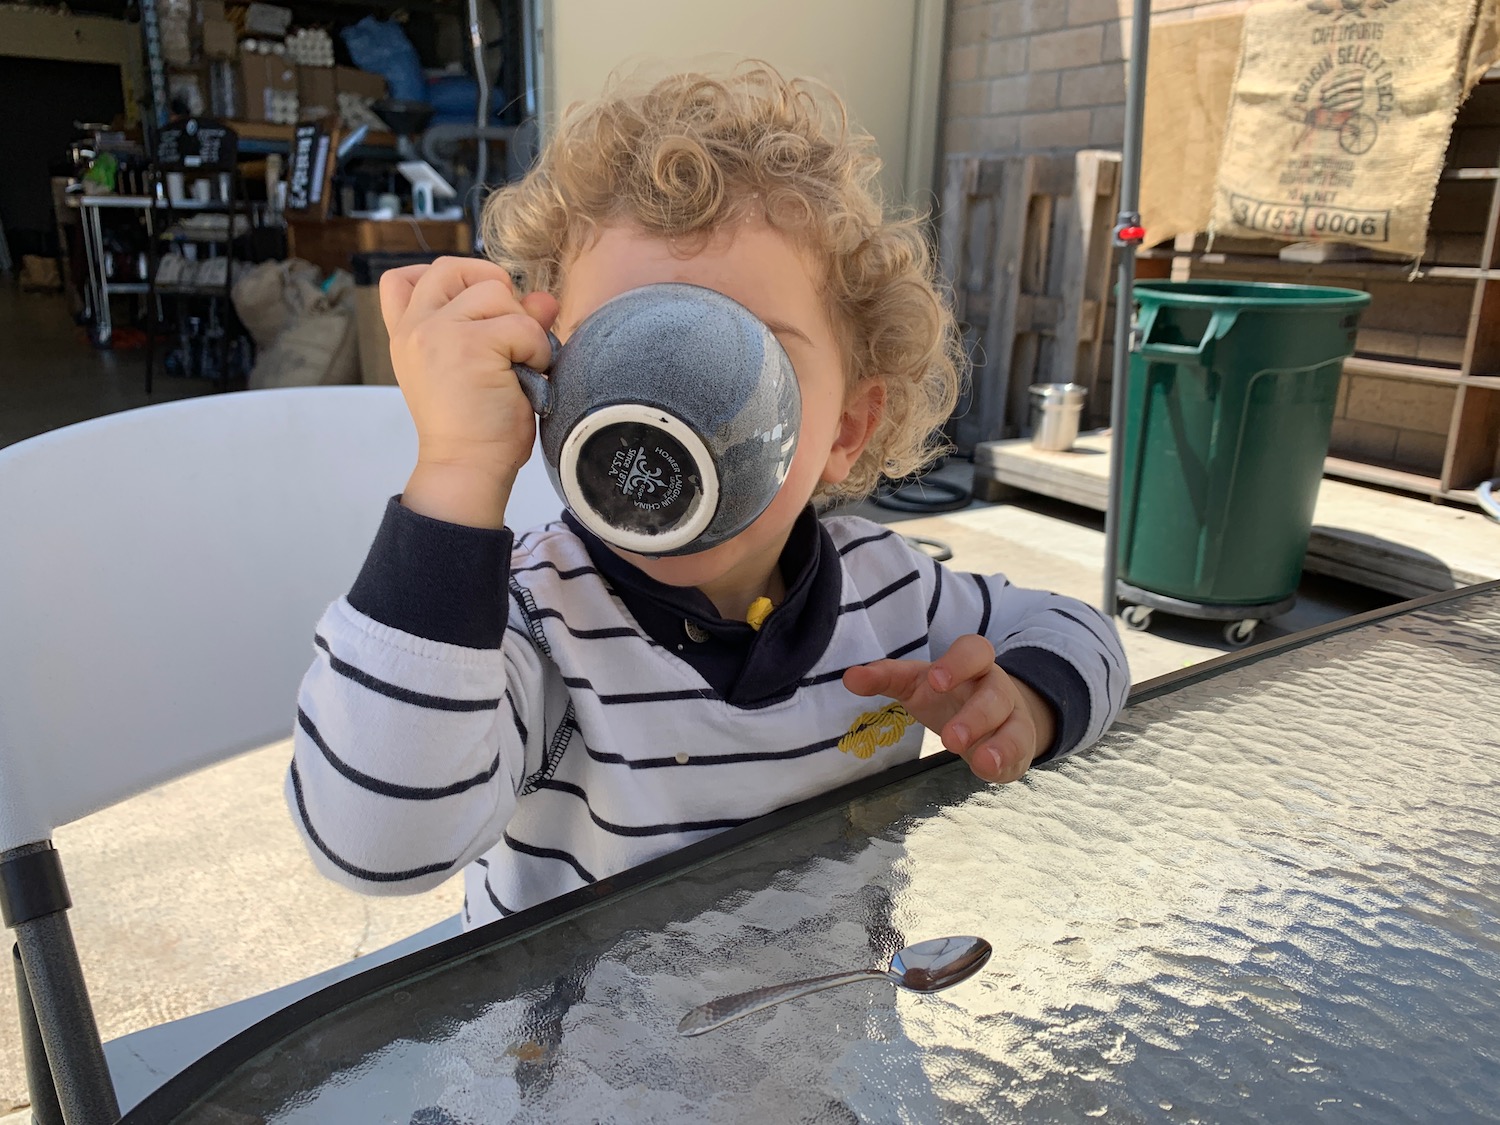 a child drinking from a tea cup